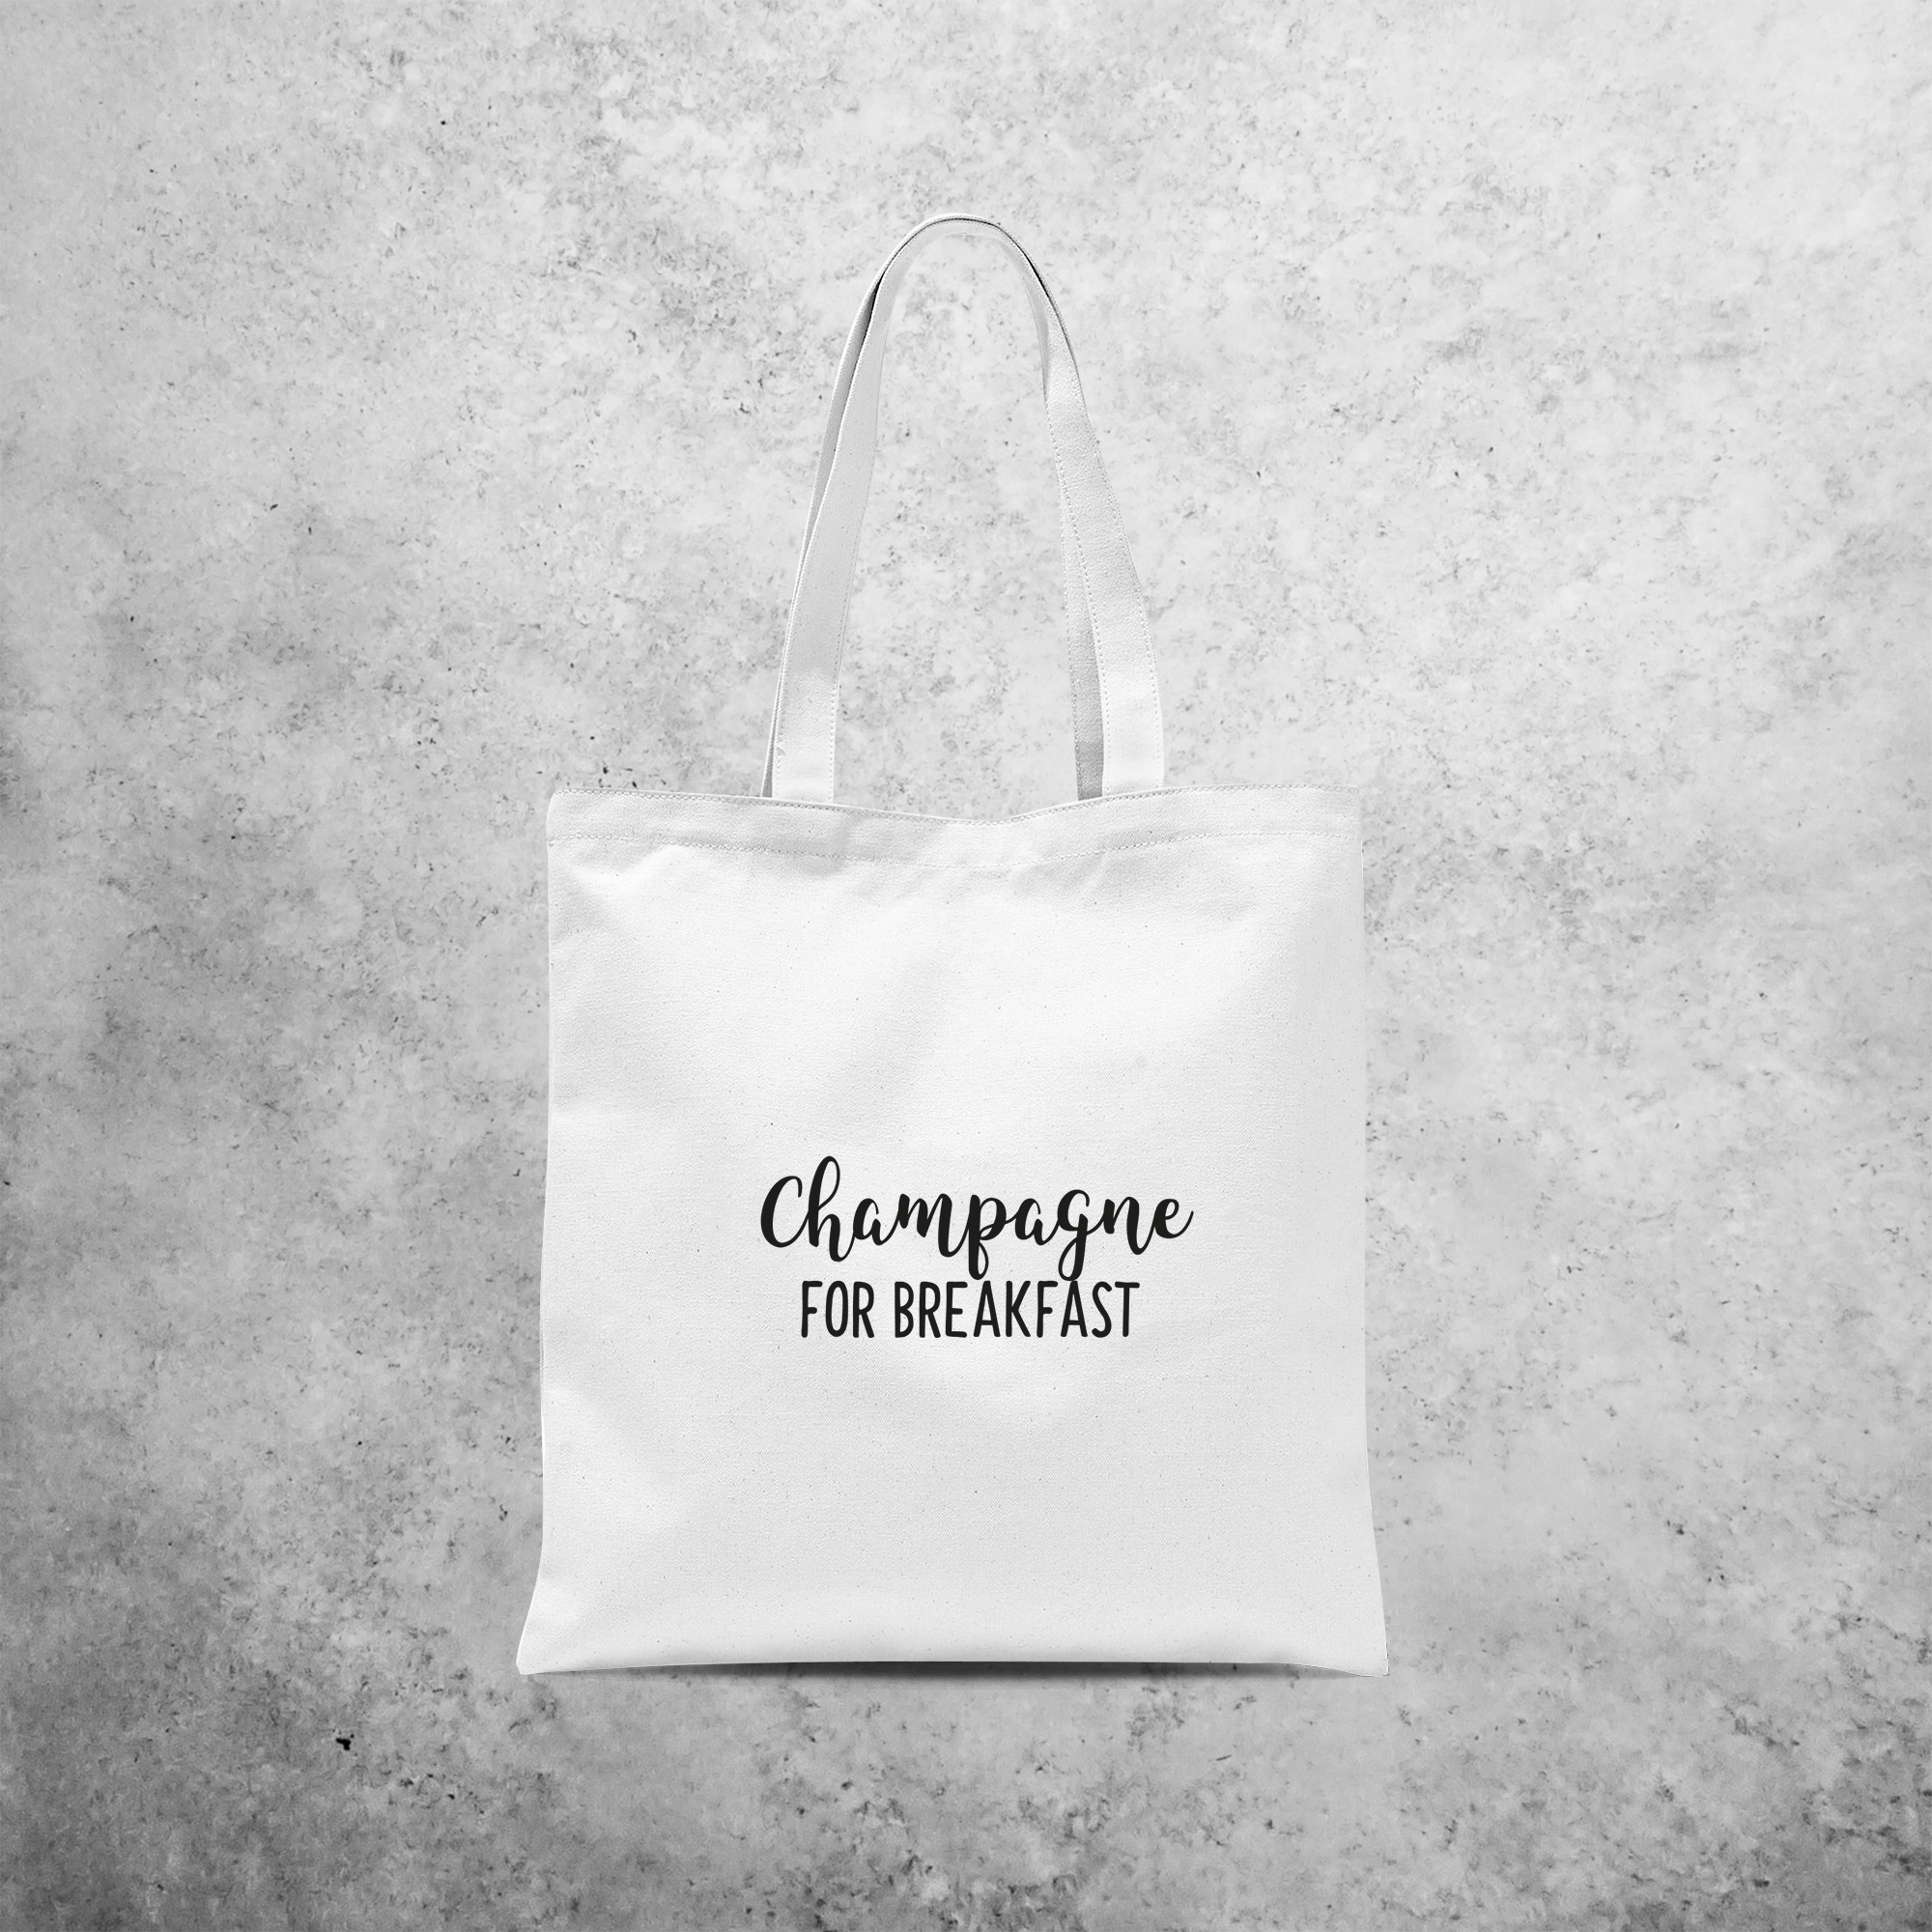 'Champagne for breakfast' tote bag